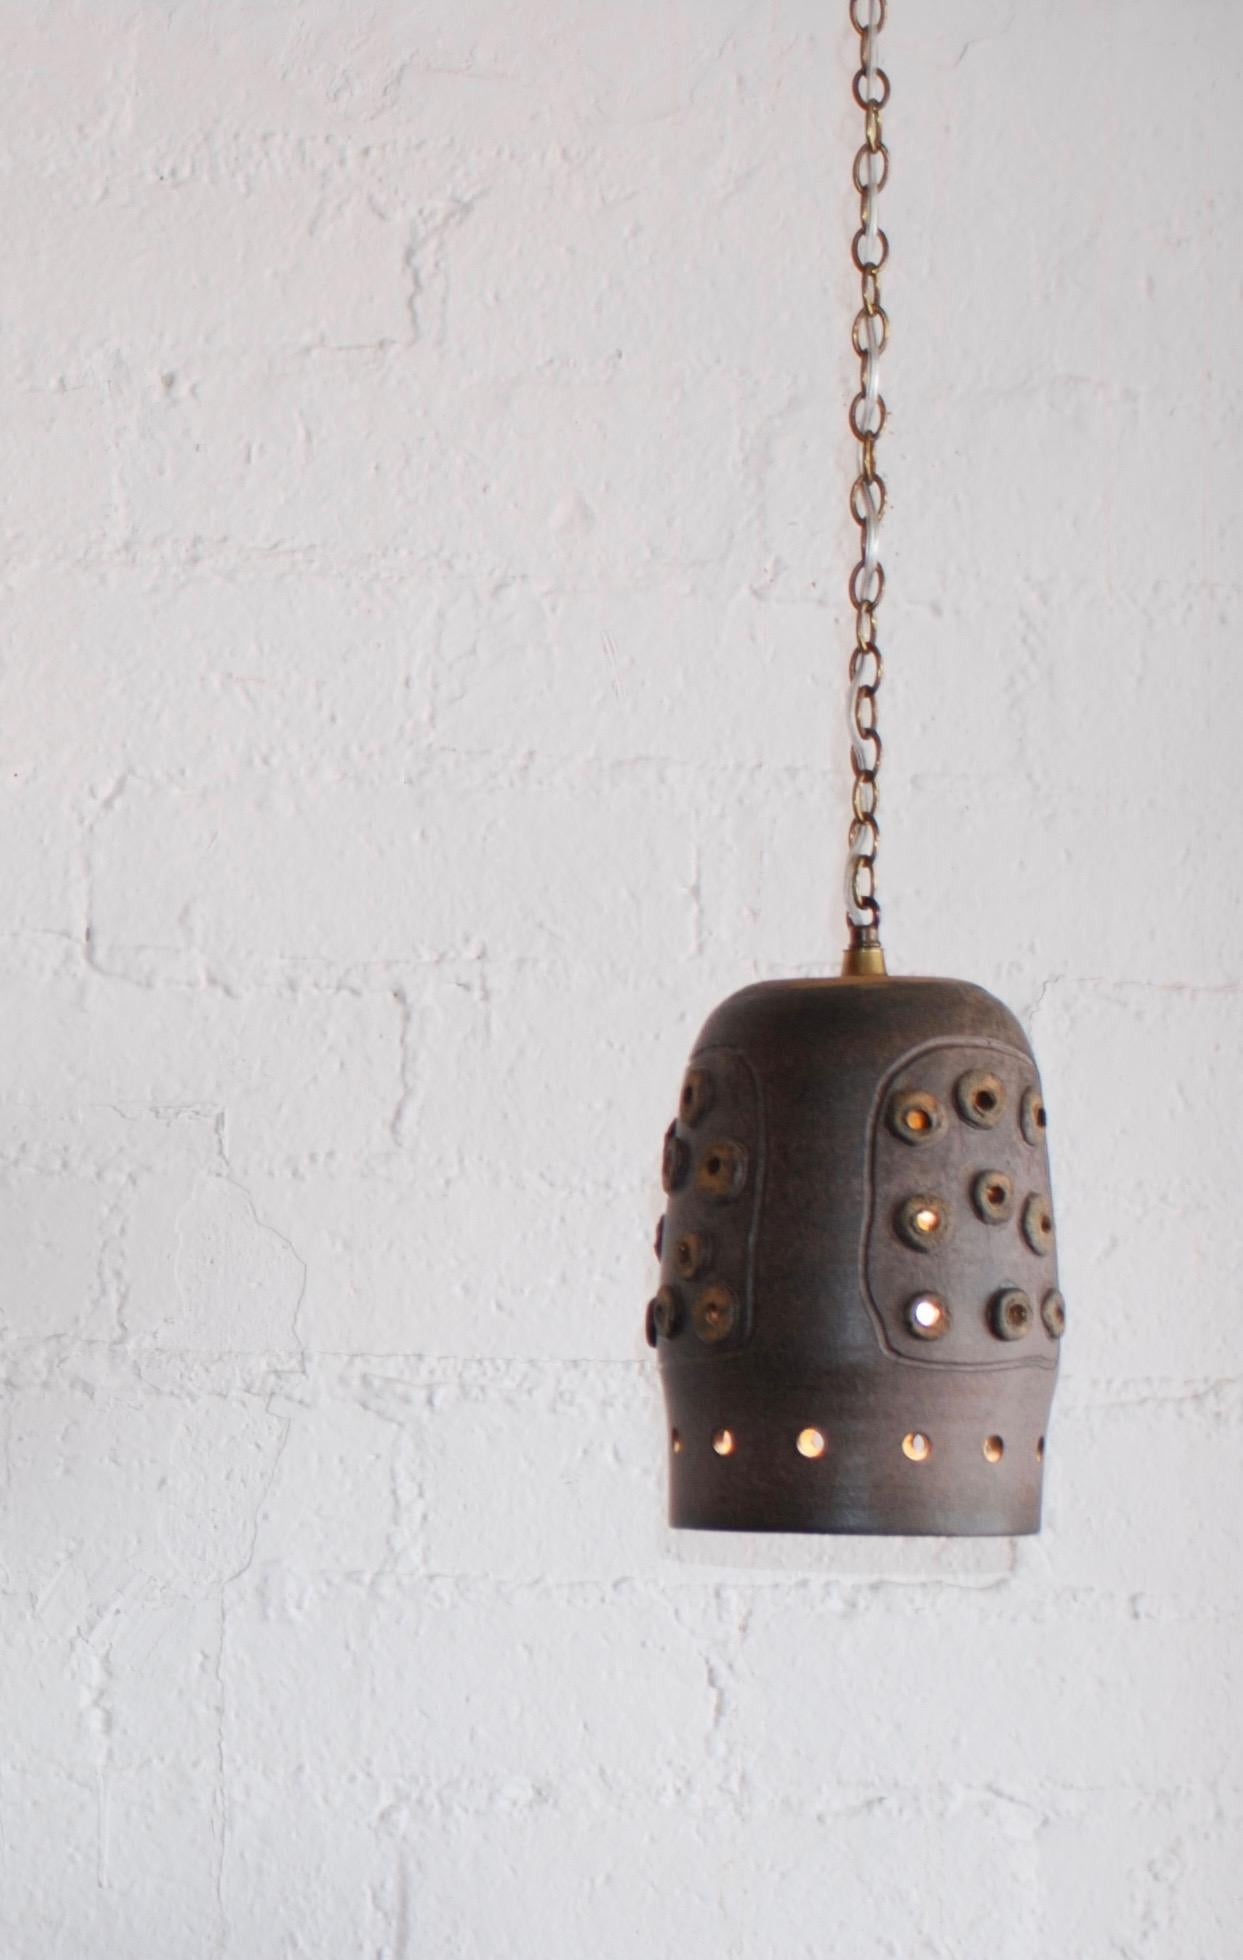 A California Studio Pottery hanging lamp. The pendant has an earth toned glaze and decorative circular penetrations which allows the light to shine through. The pendant is signed although the signature is illegible. The chain is 26